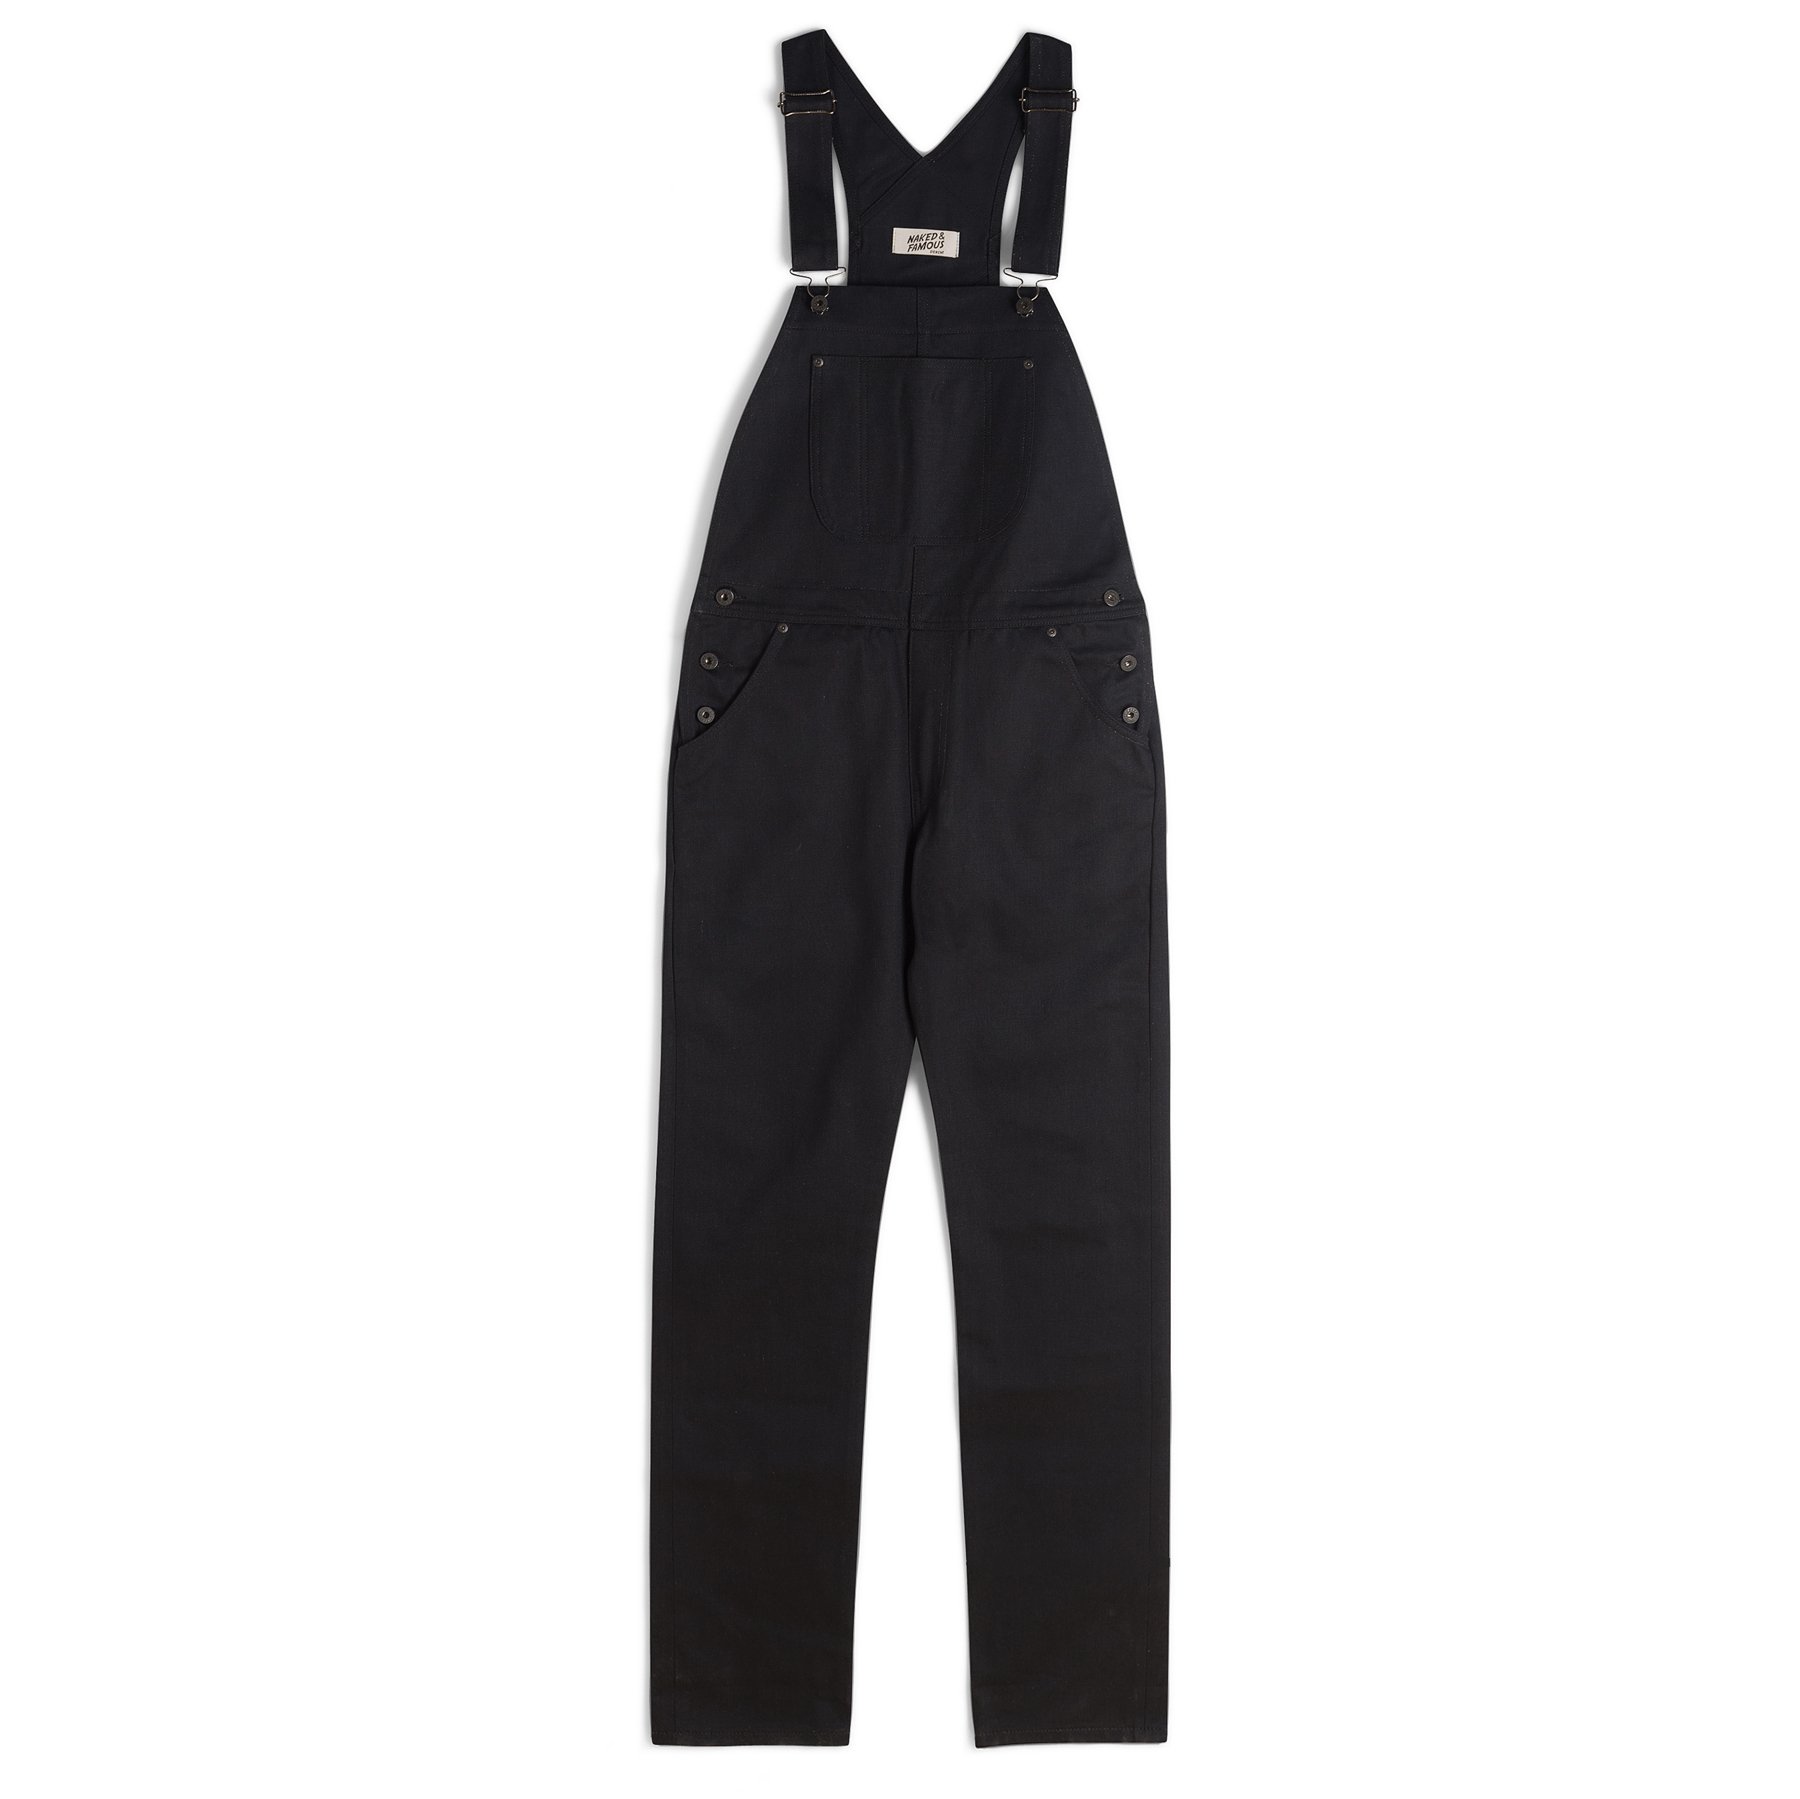  Overalls - Solid Black Selvedge - Front 